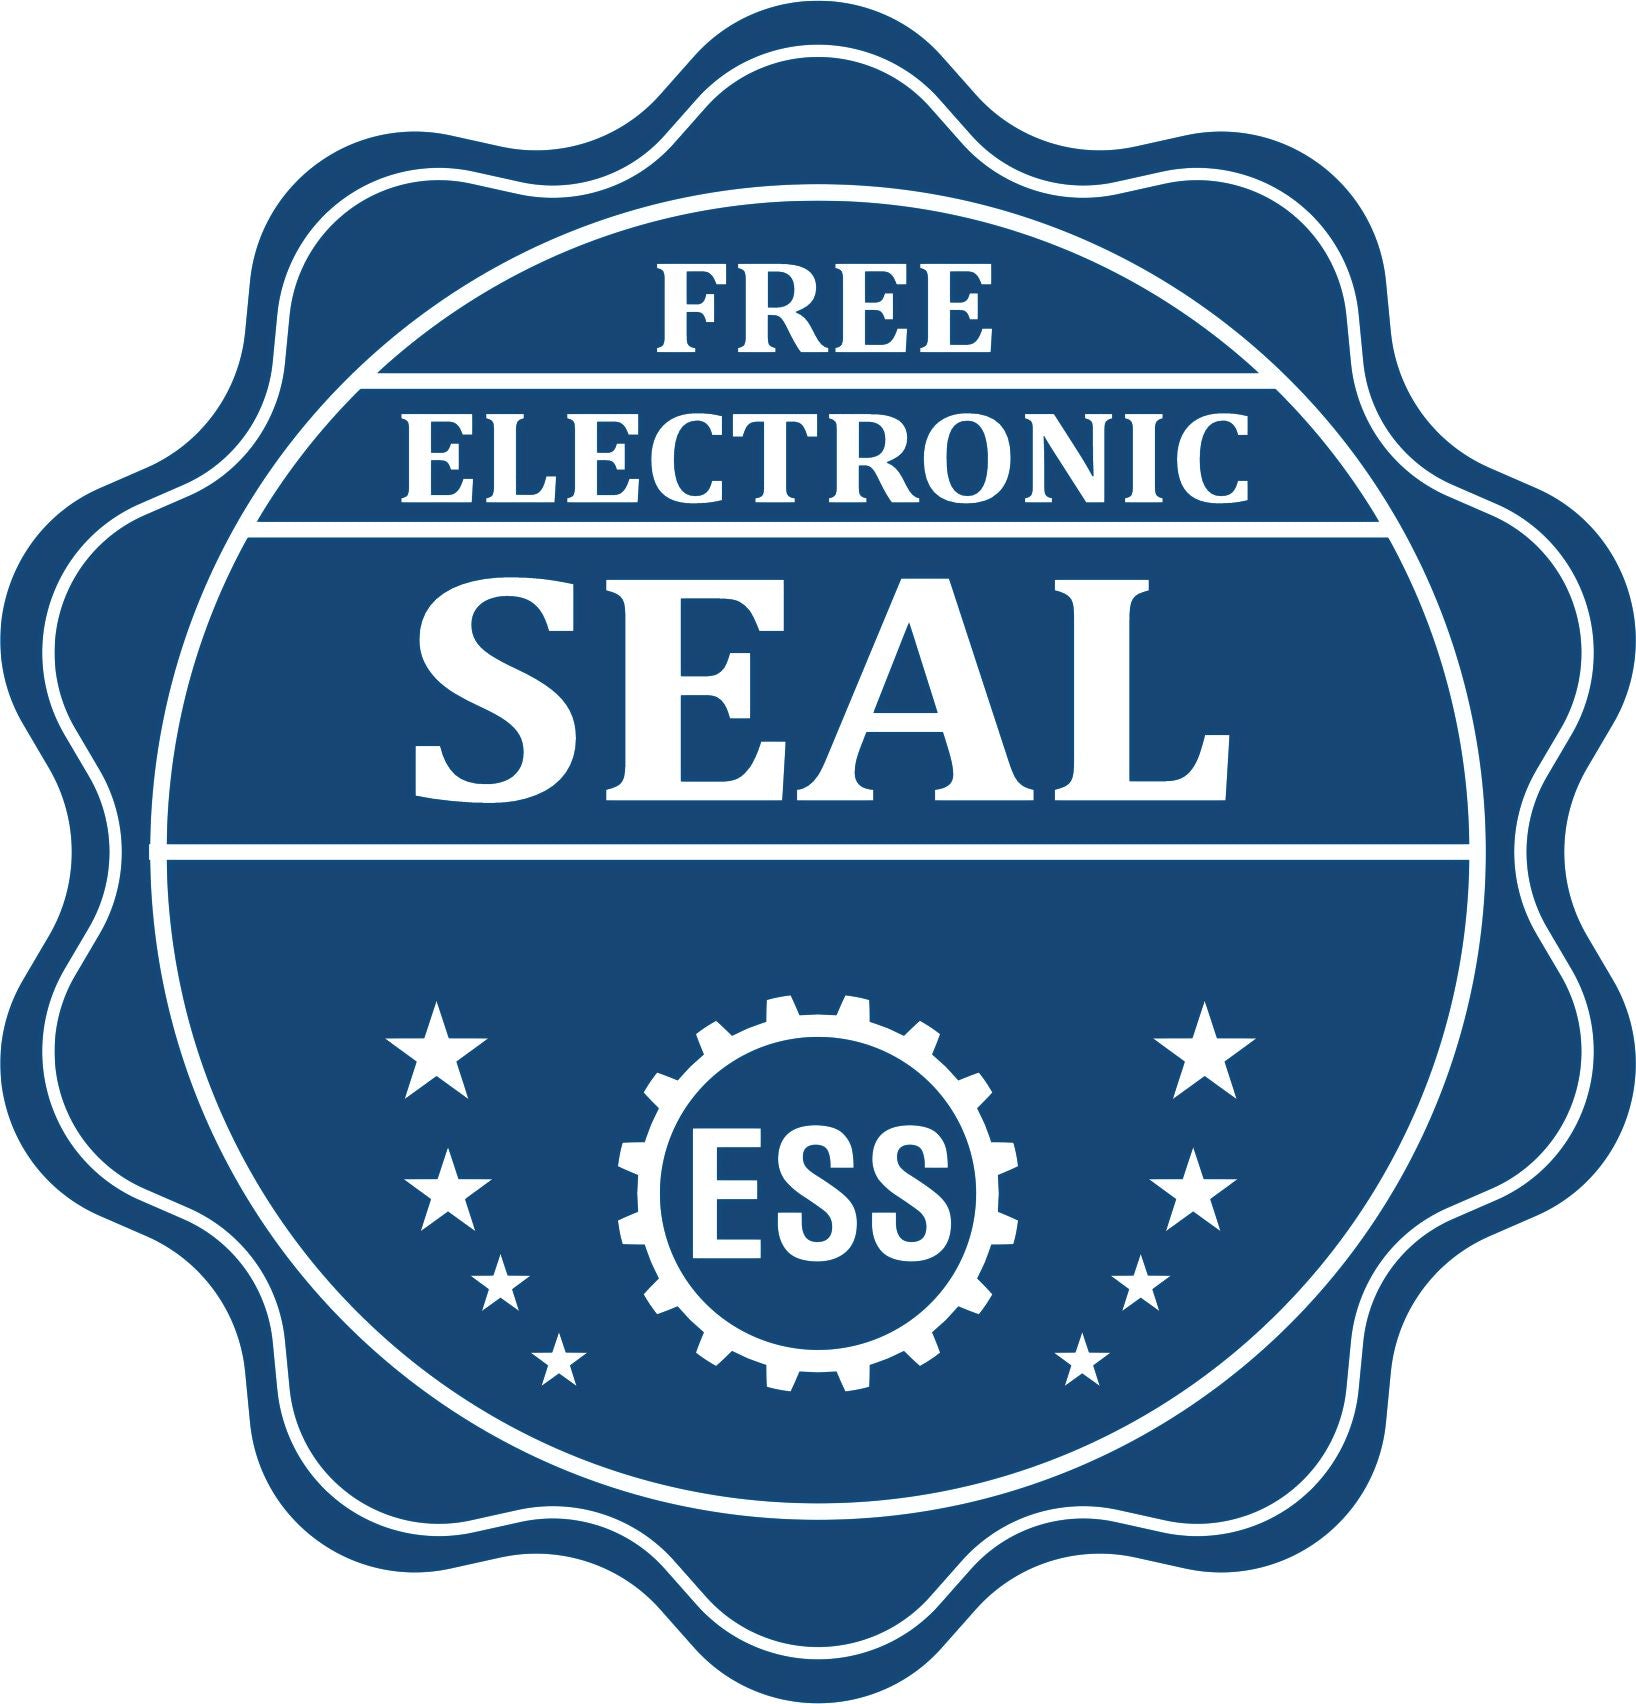 A badge showing a free electronic seal for the Kansas Desk Architect Embossing Seal with stars and the ESS gear on the emblem.